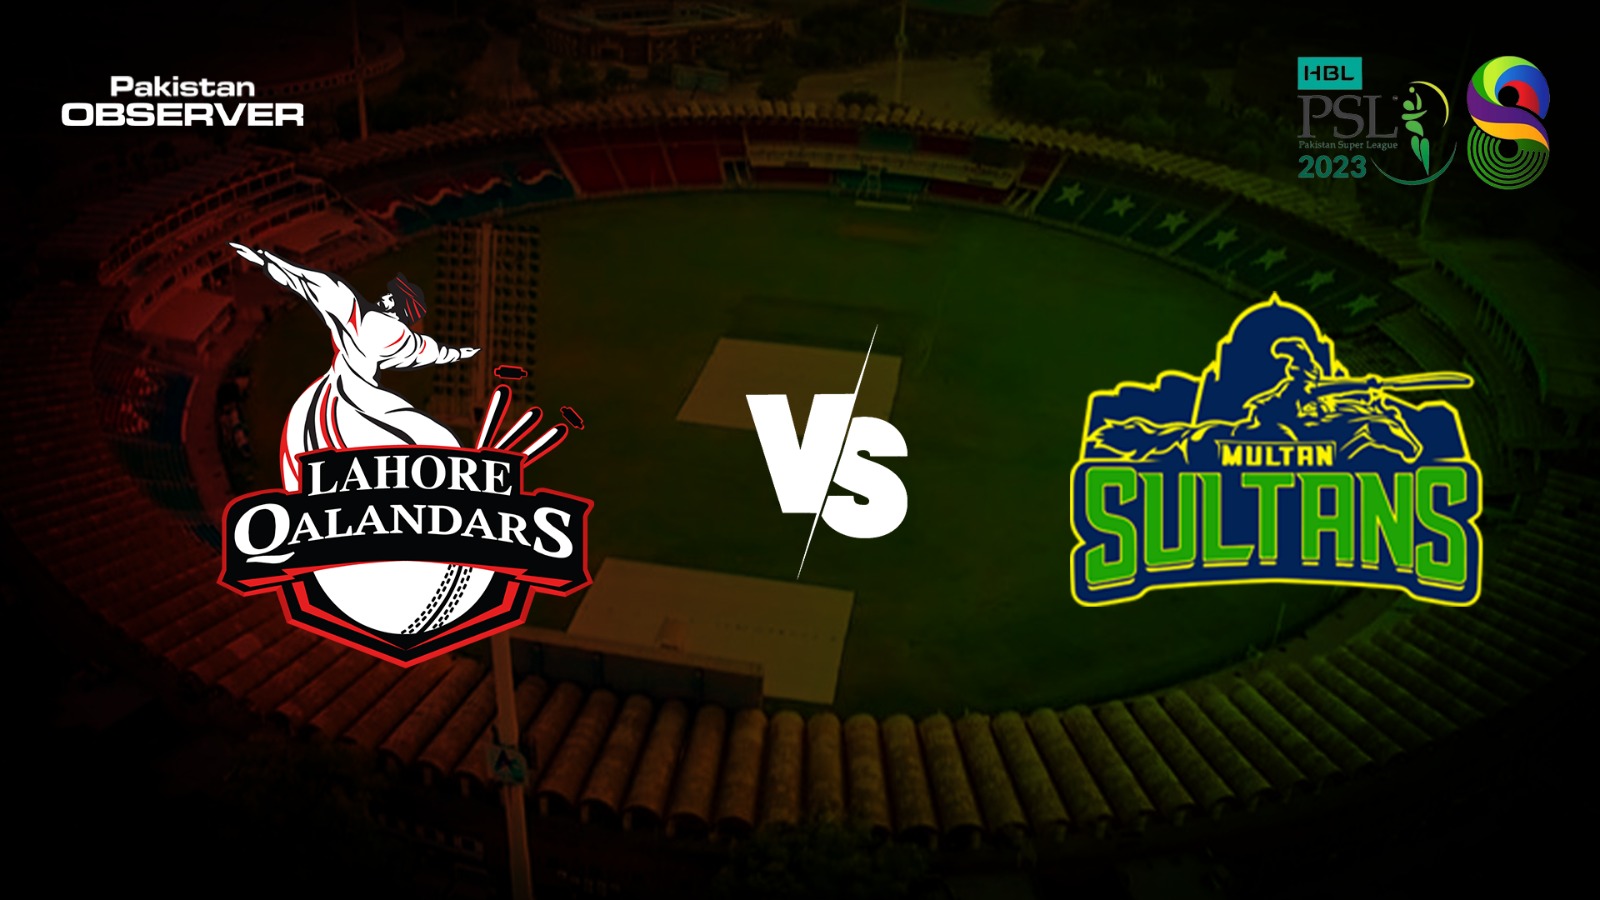 PSL 8 Final Lahore Qalandars vs Multan Sultans all you need to know